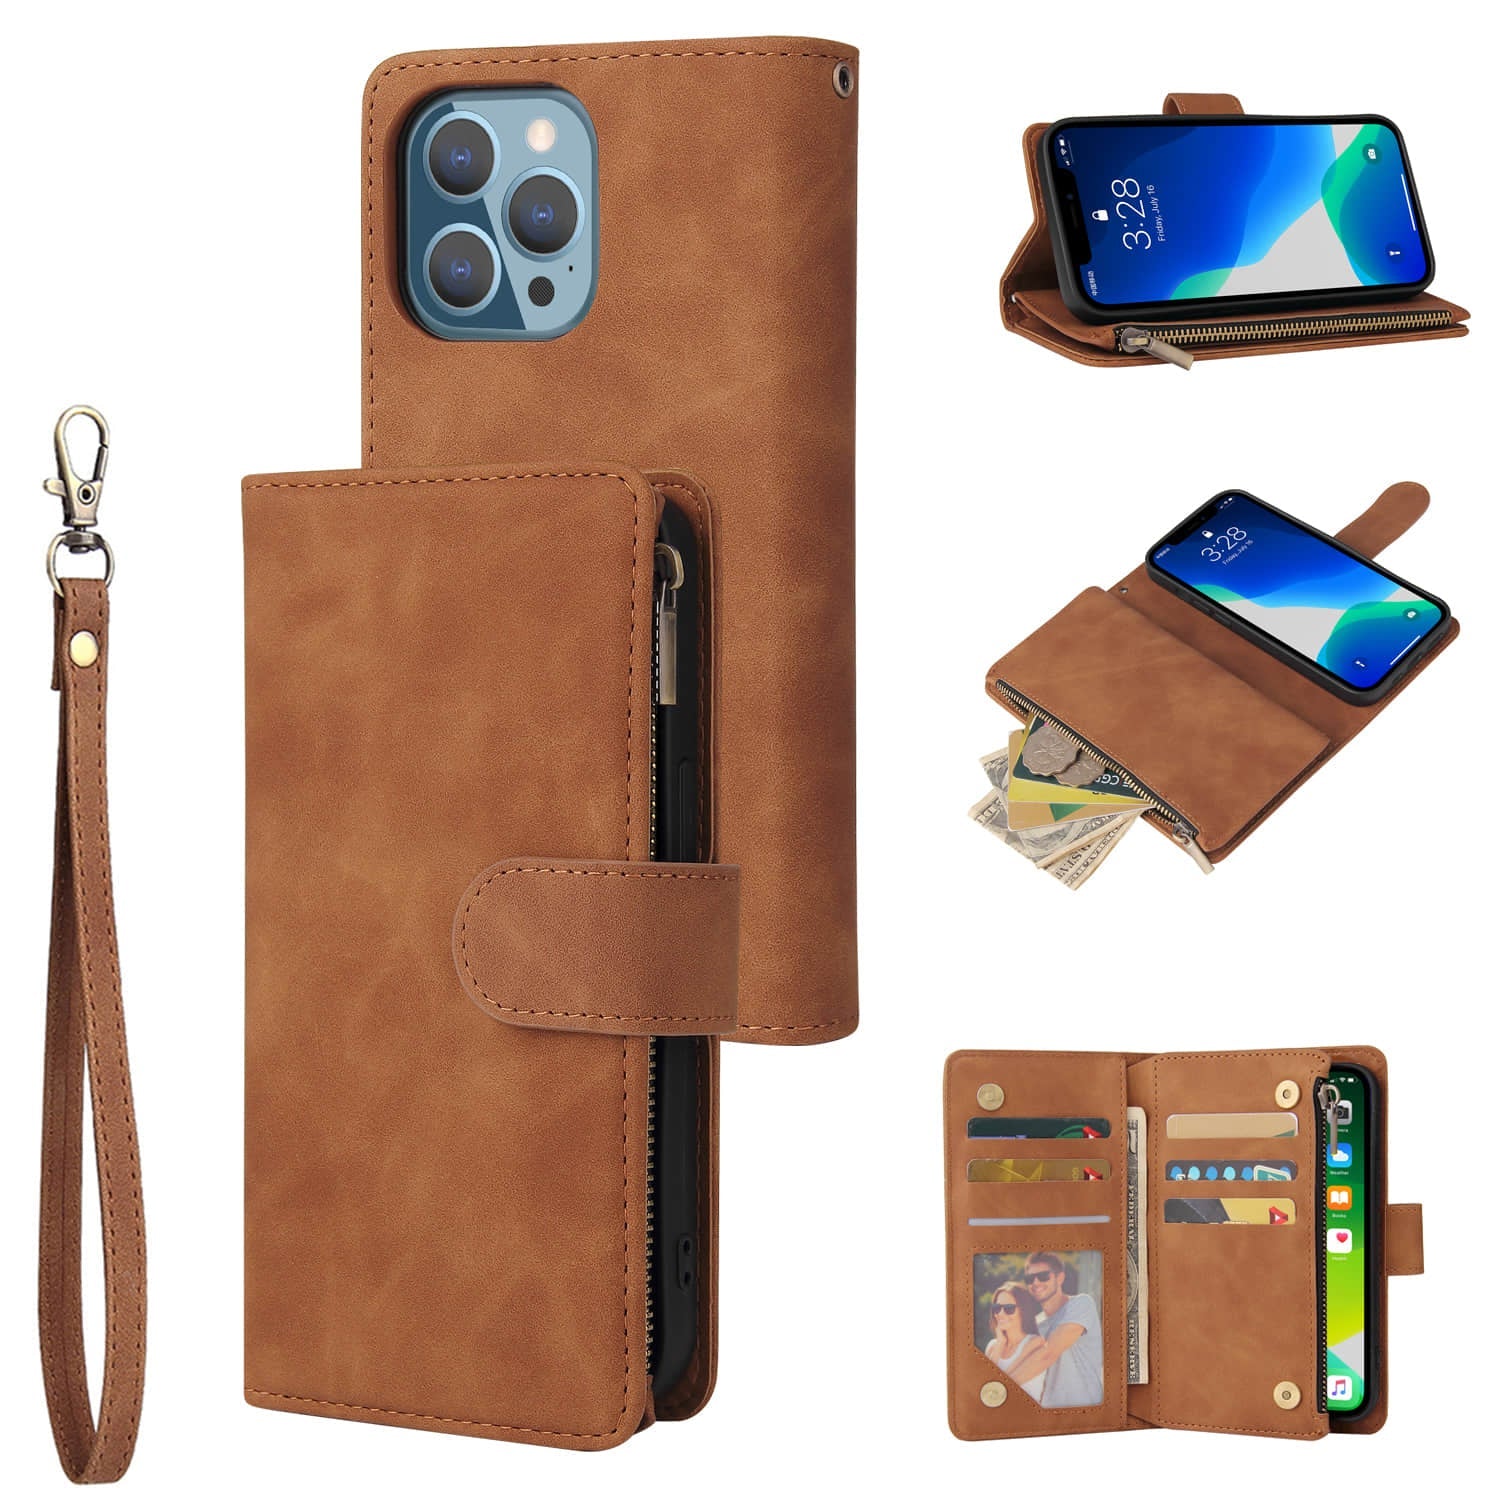 Caeouts Classic Clamshell Phone Case Brown